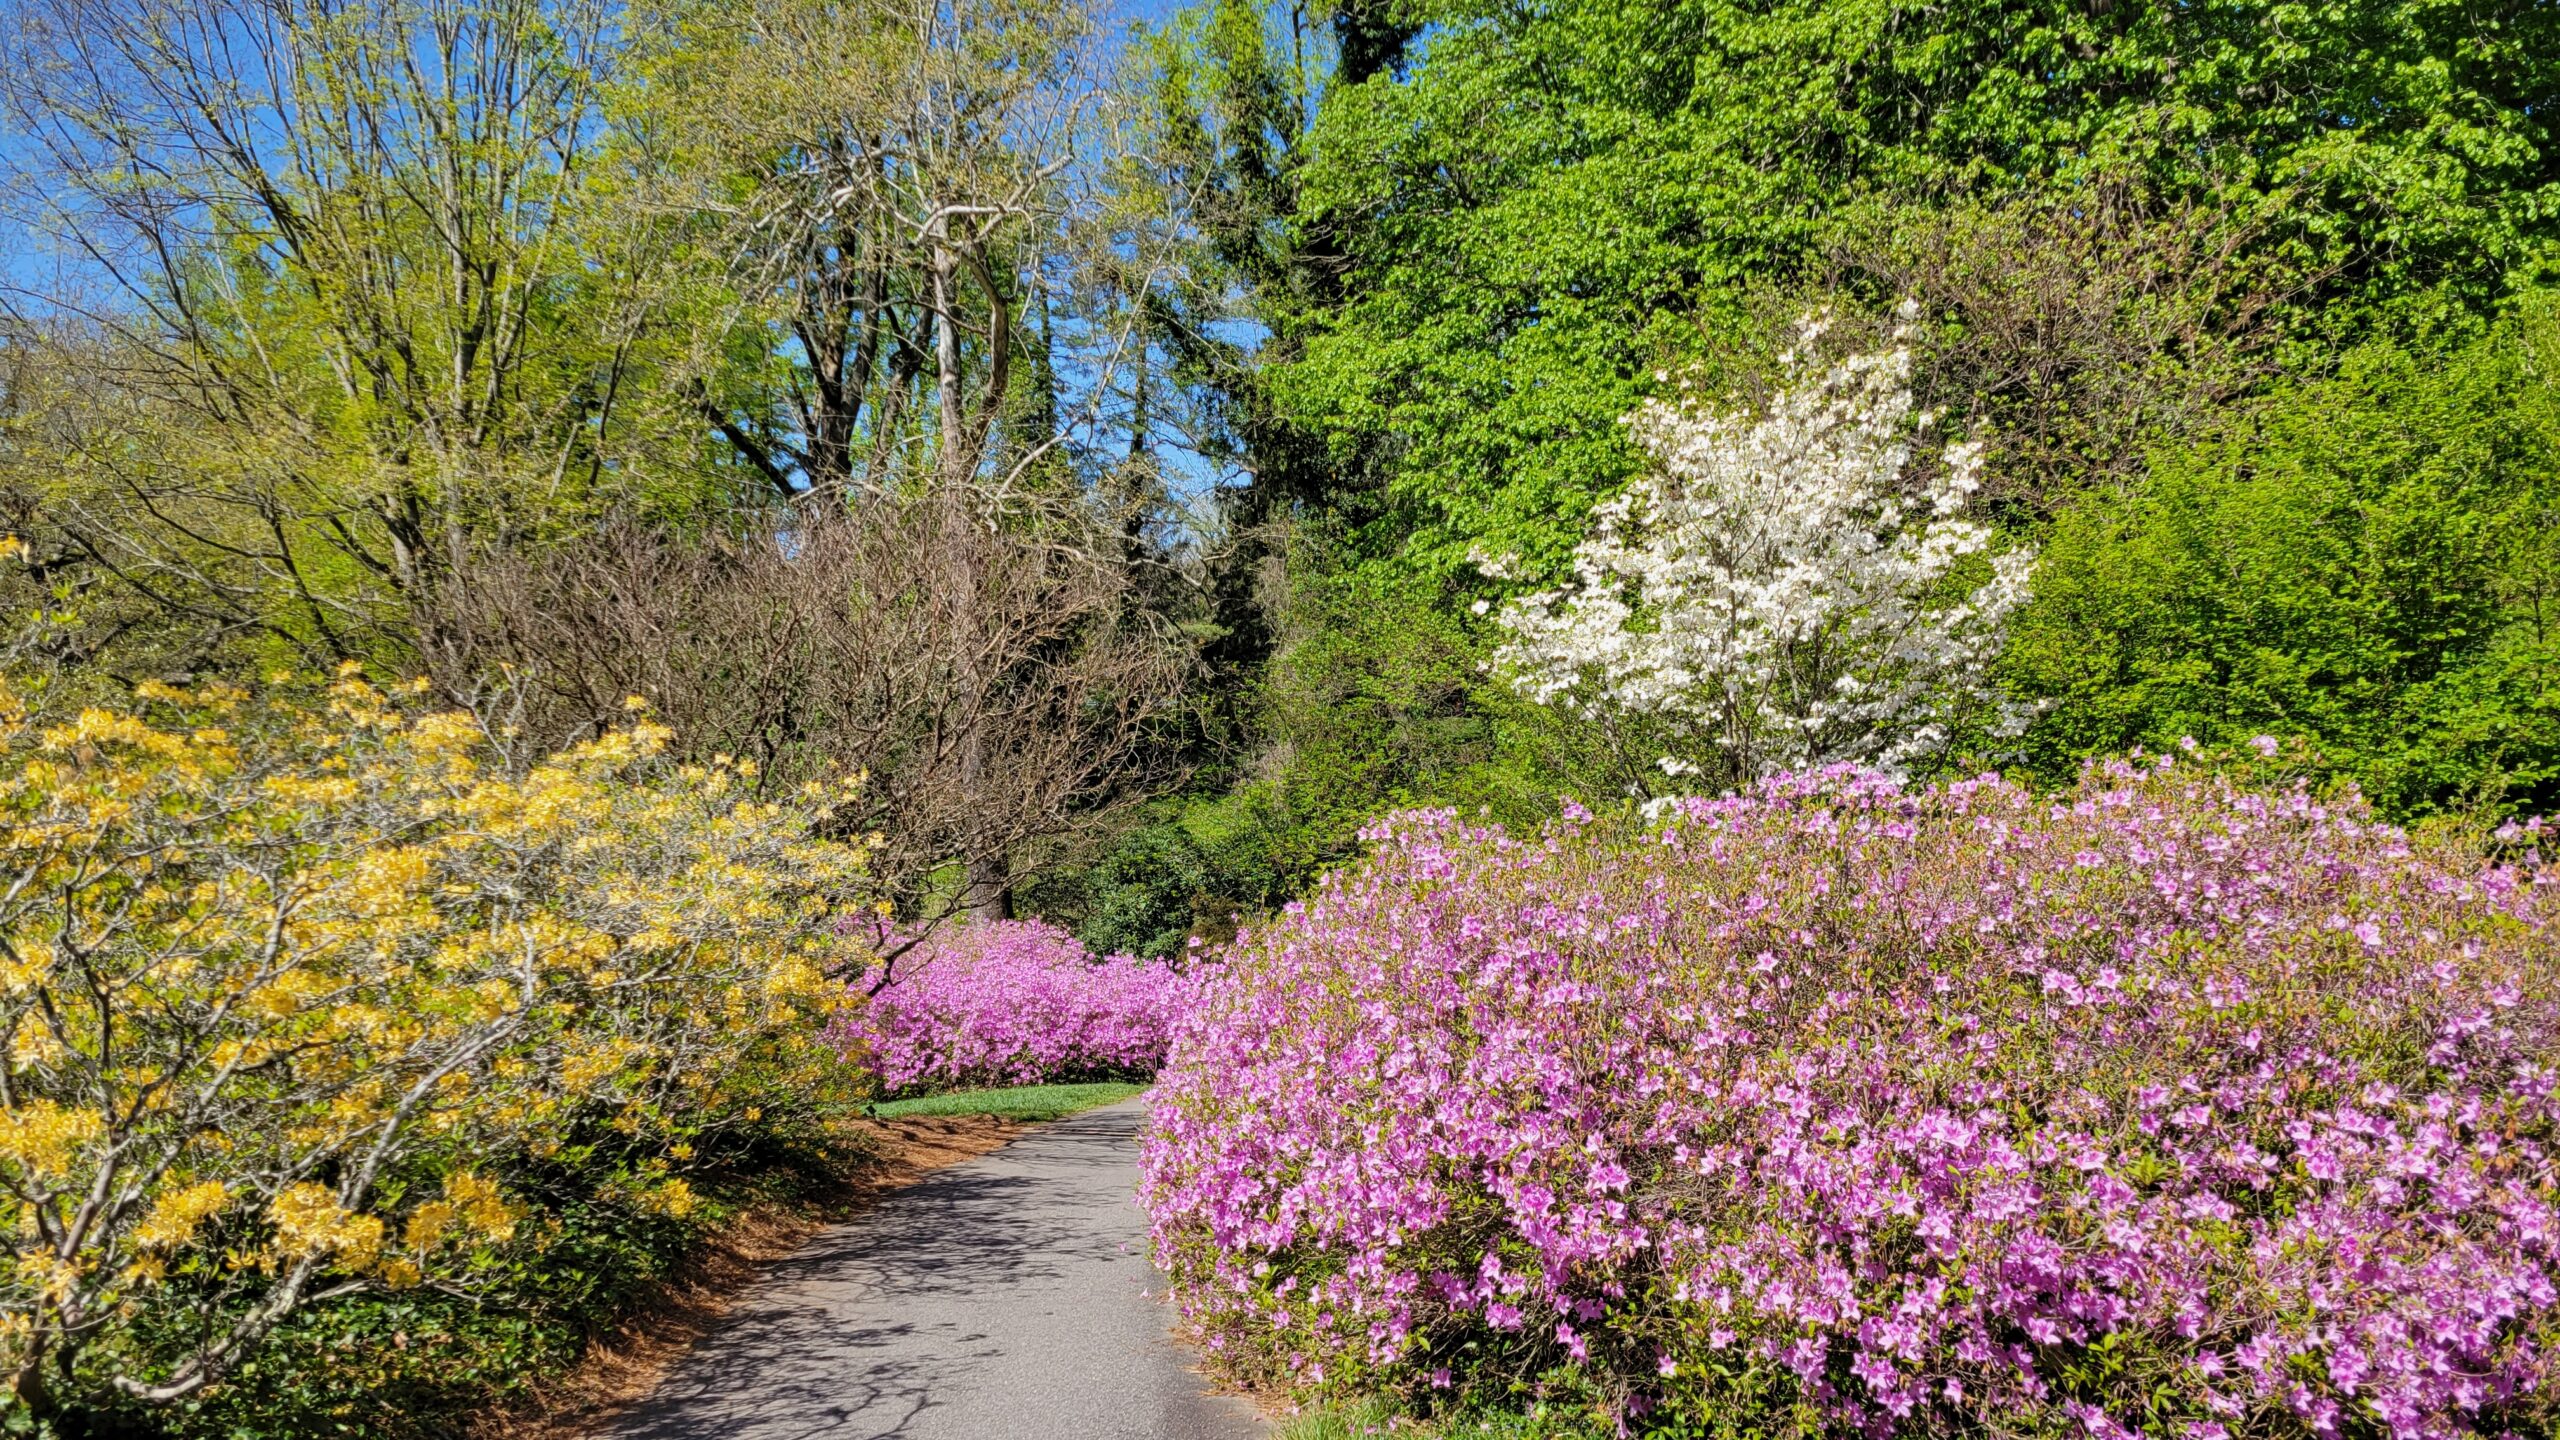 A paved foot path through large azalea shrubs blooming with spring flowering trees and other trees